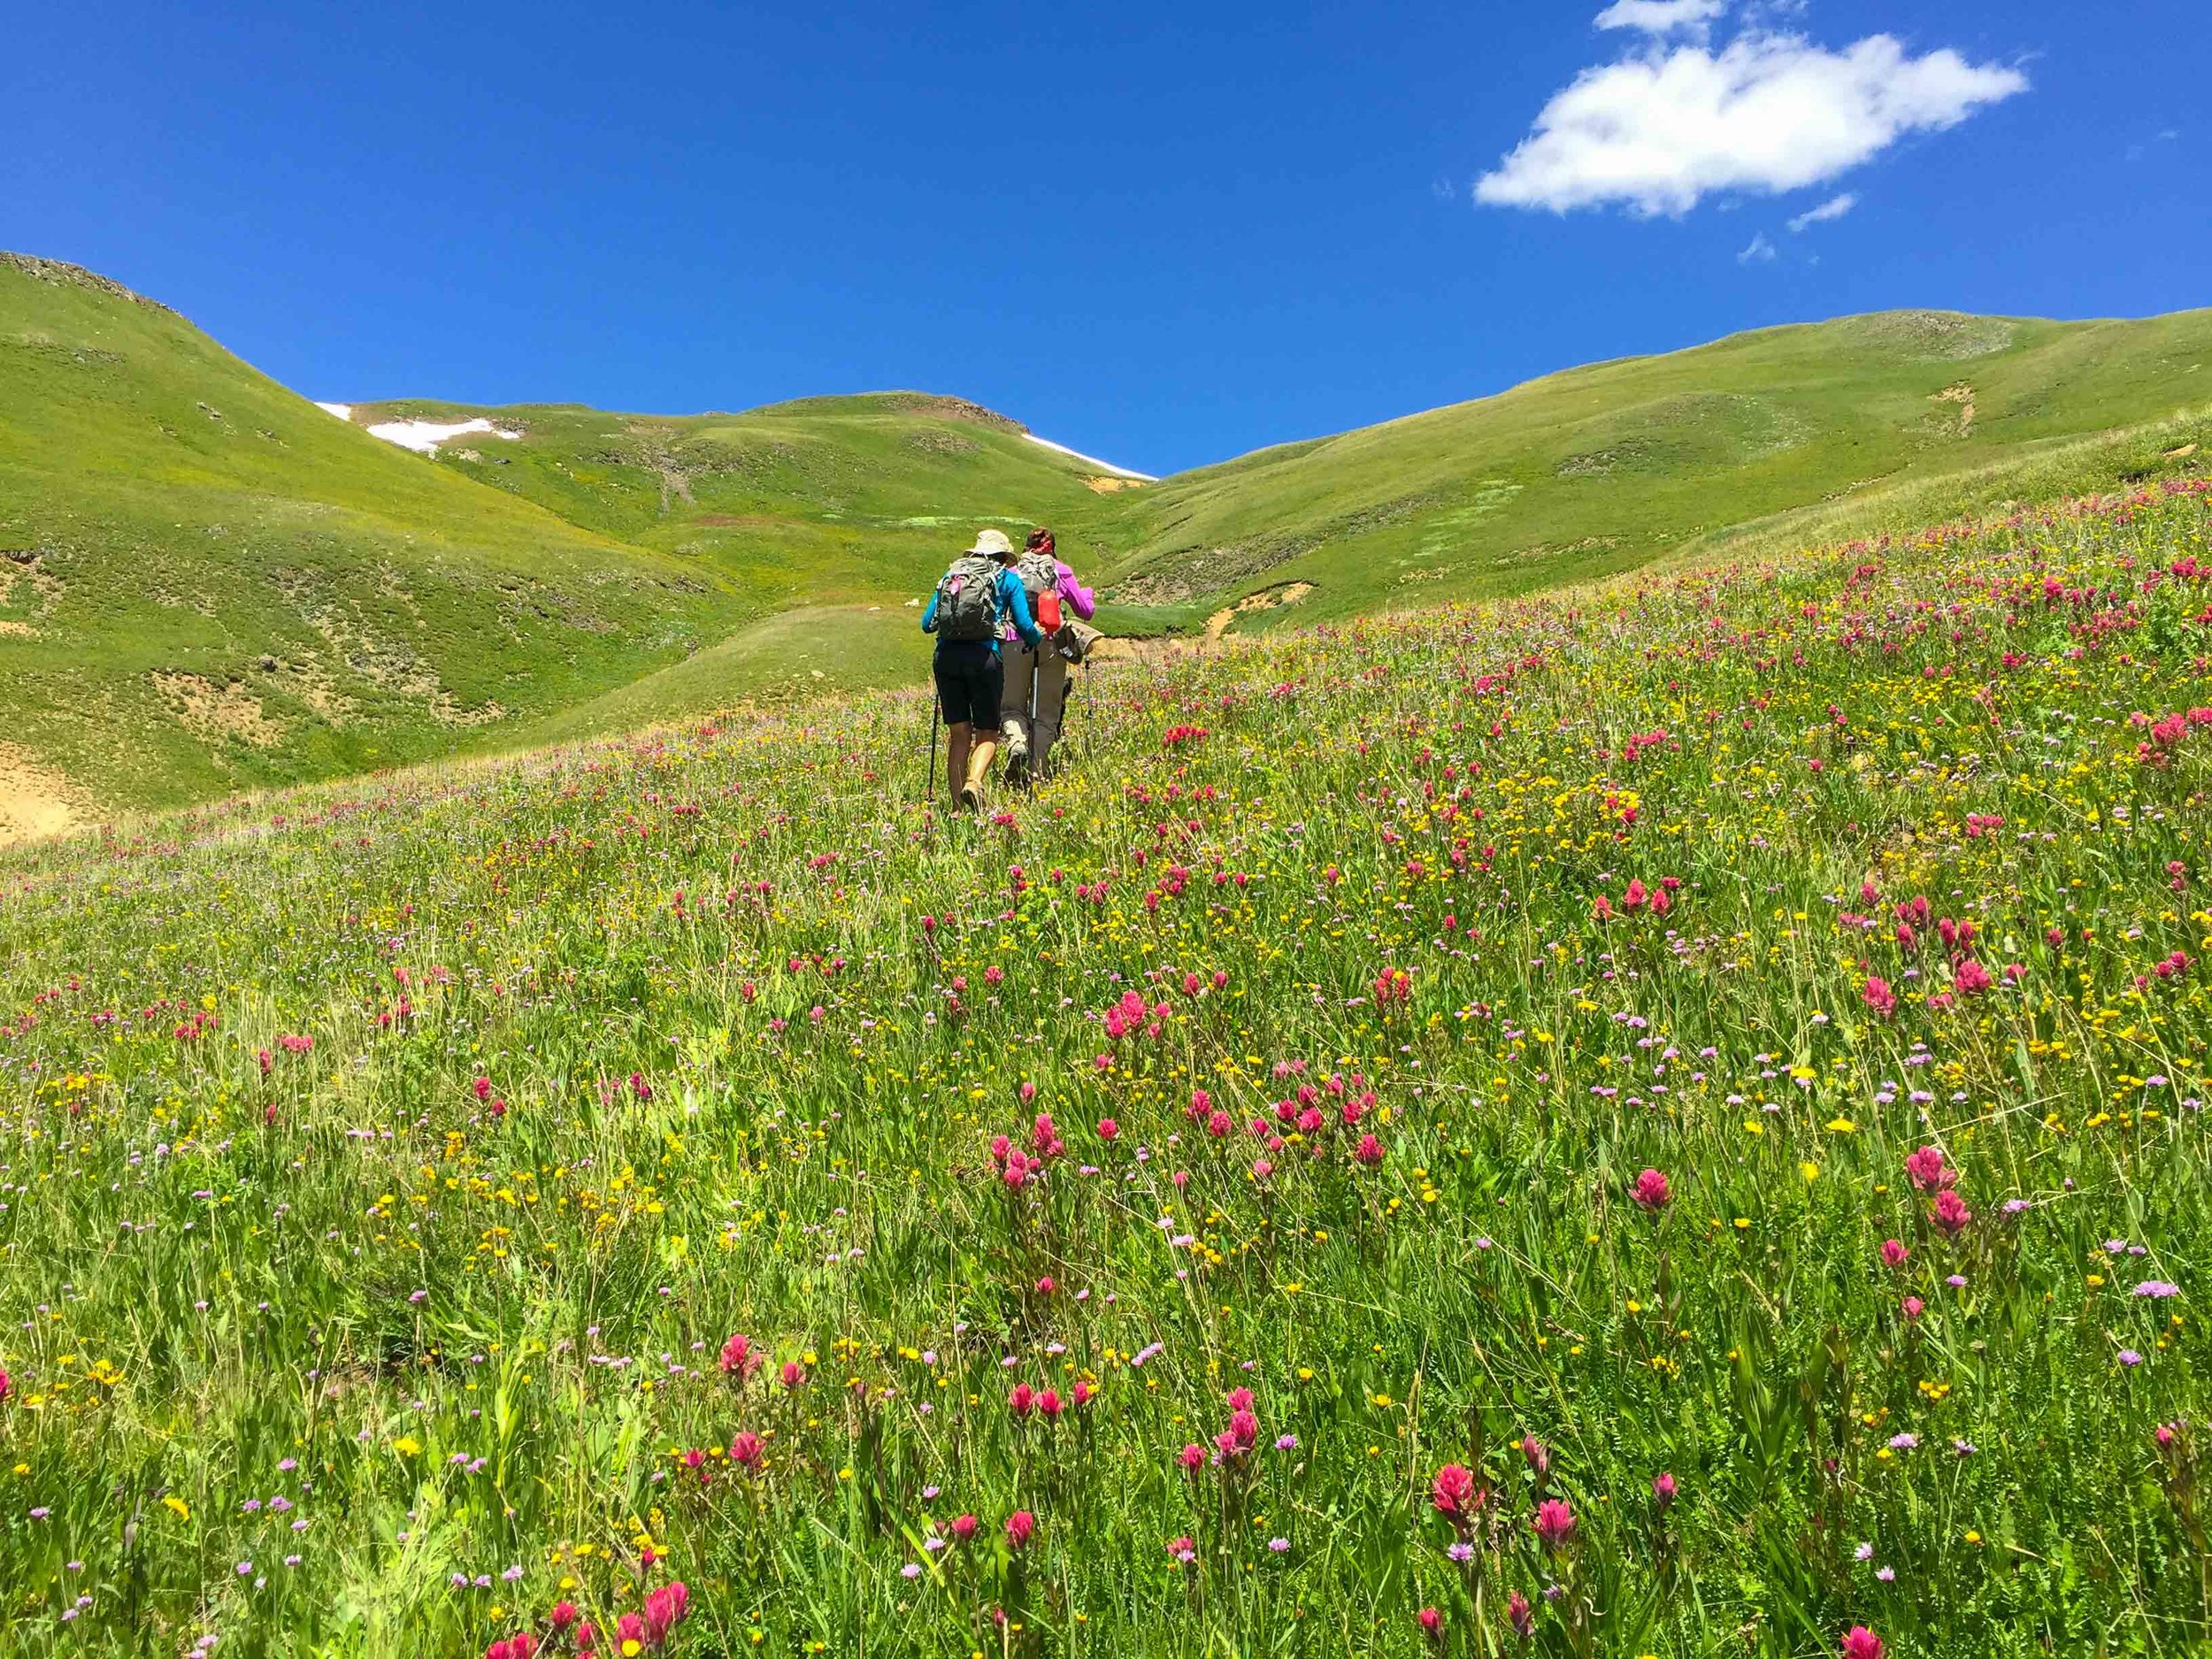 Angela and Gina head through the flower filled meadow